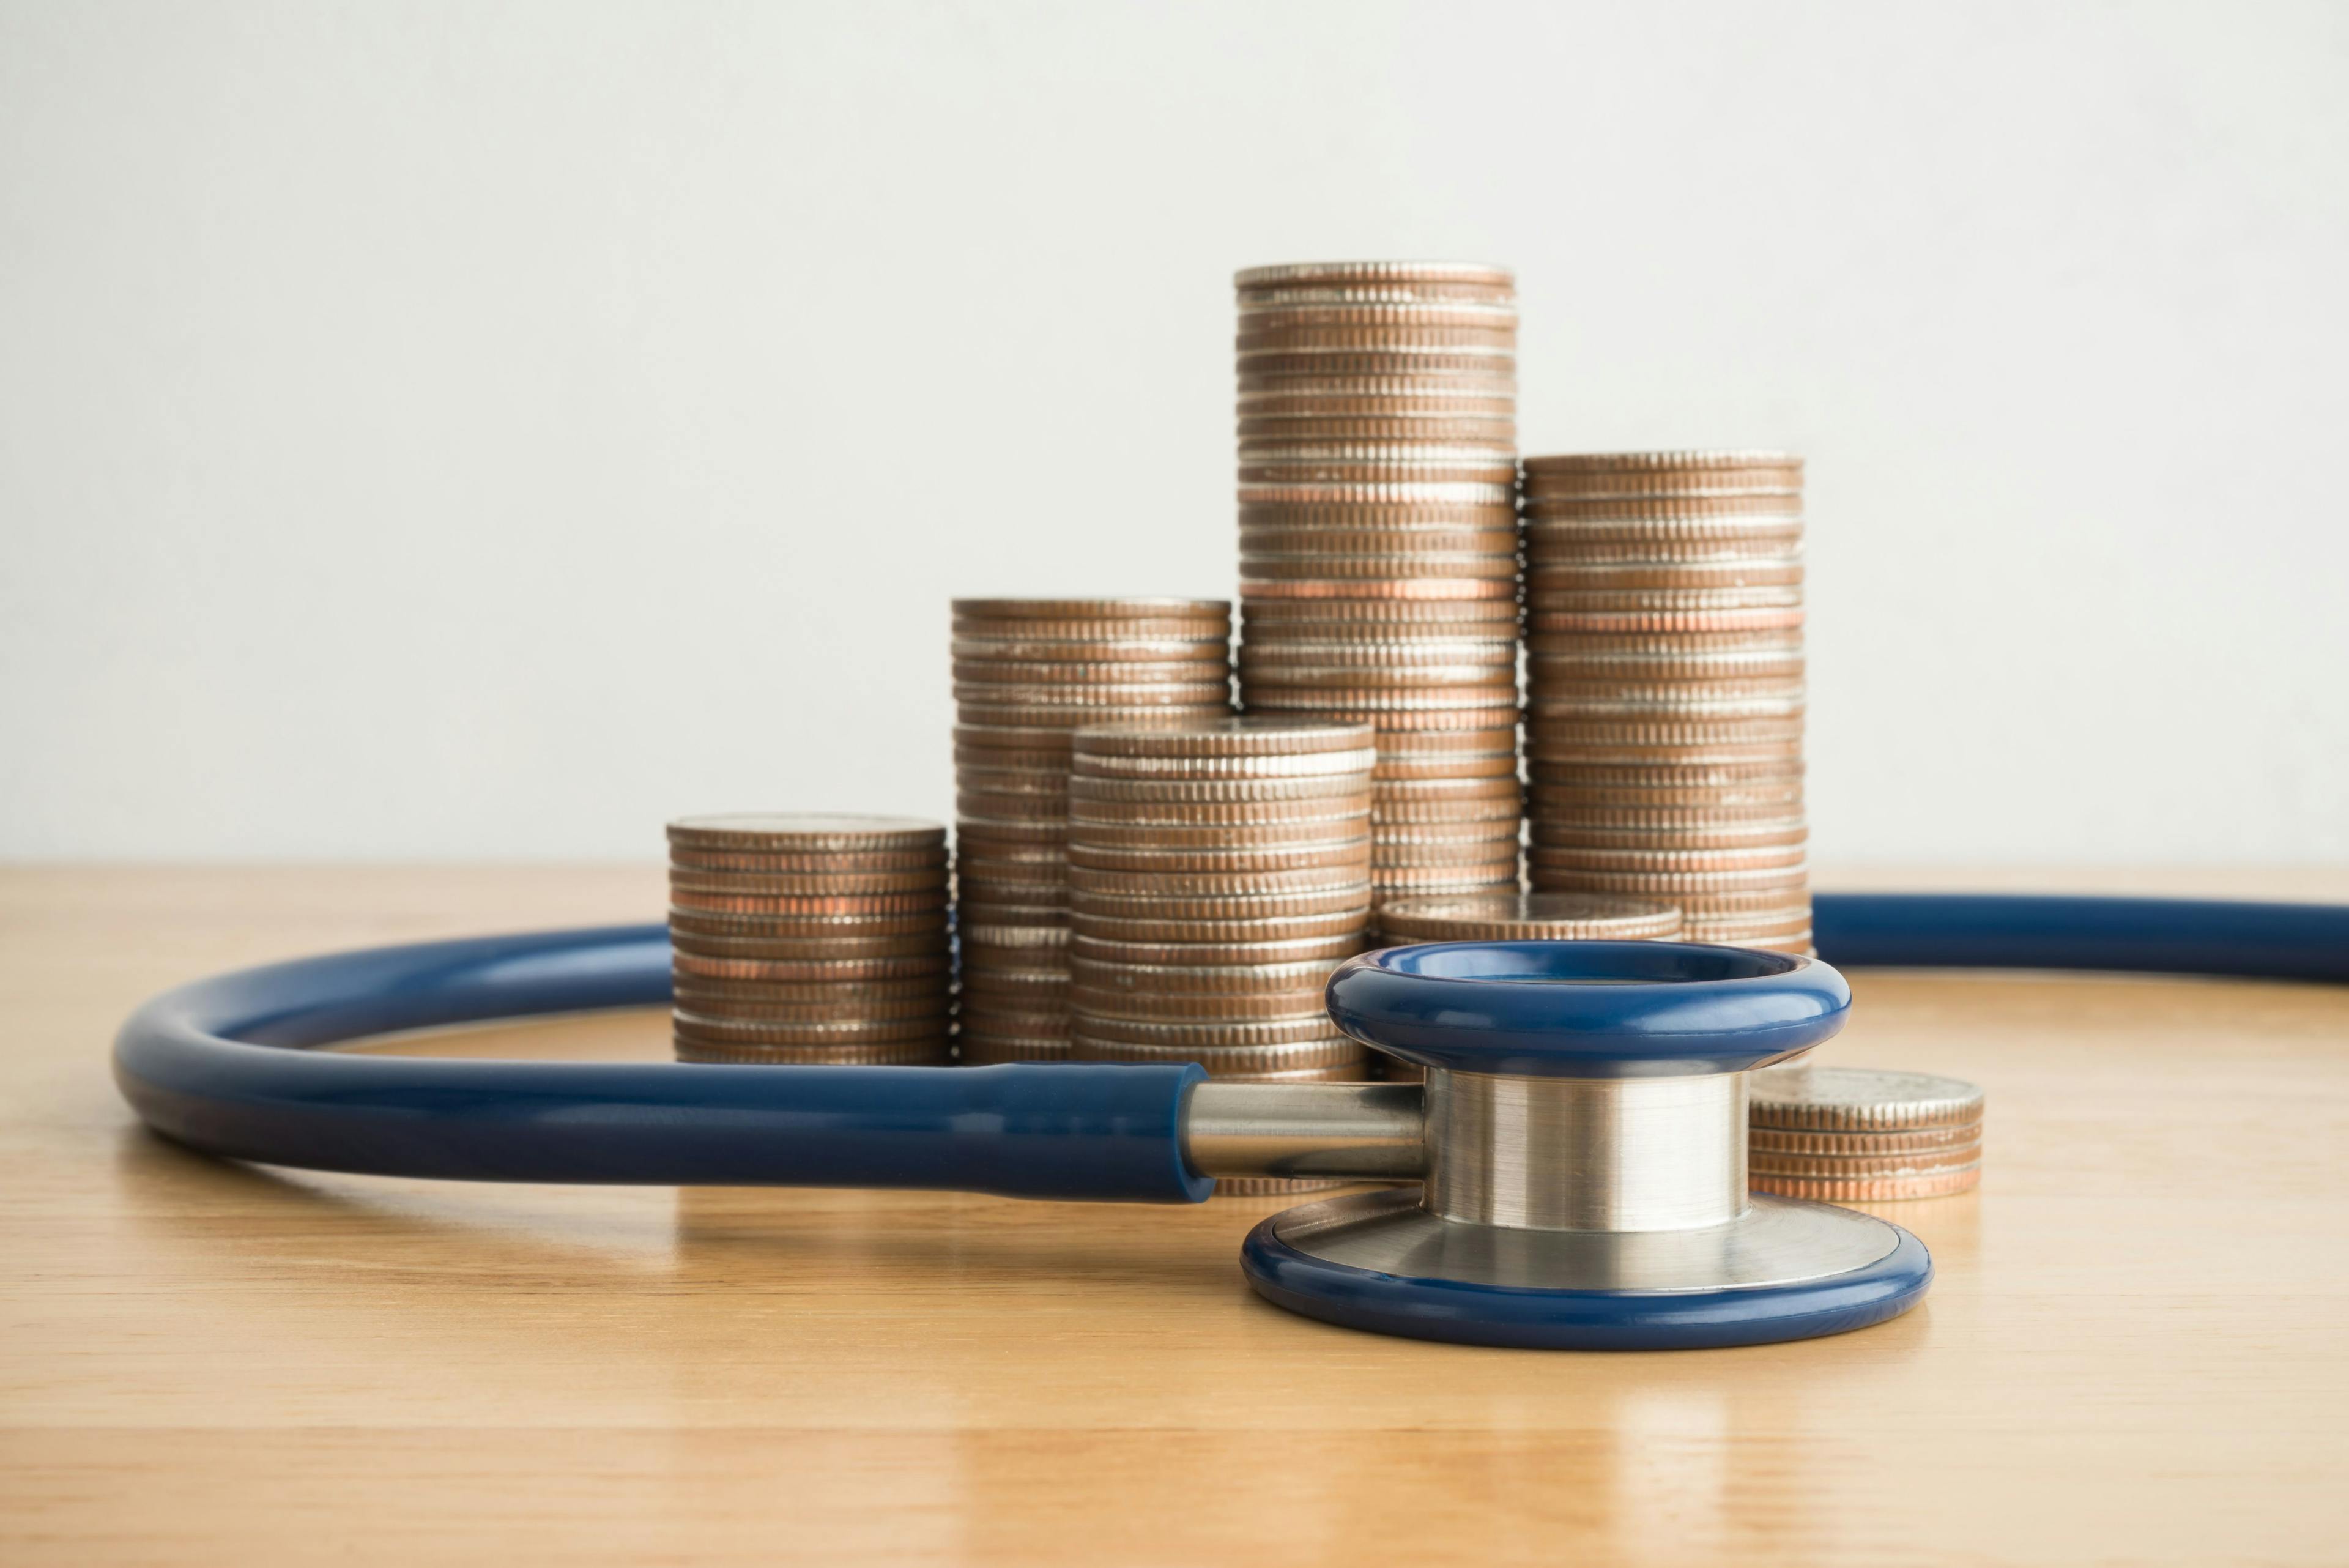 CMS Predicts Healthcare Spending to Grow 